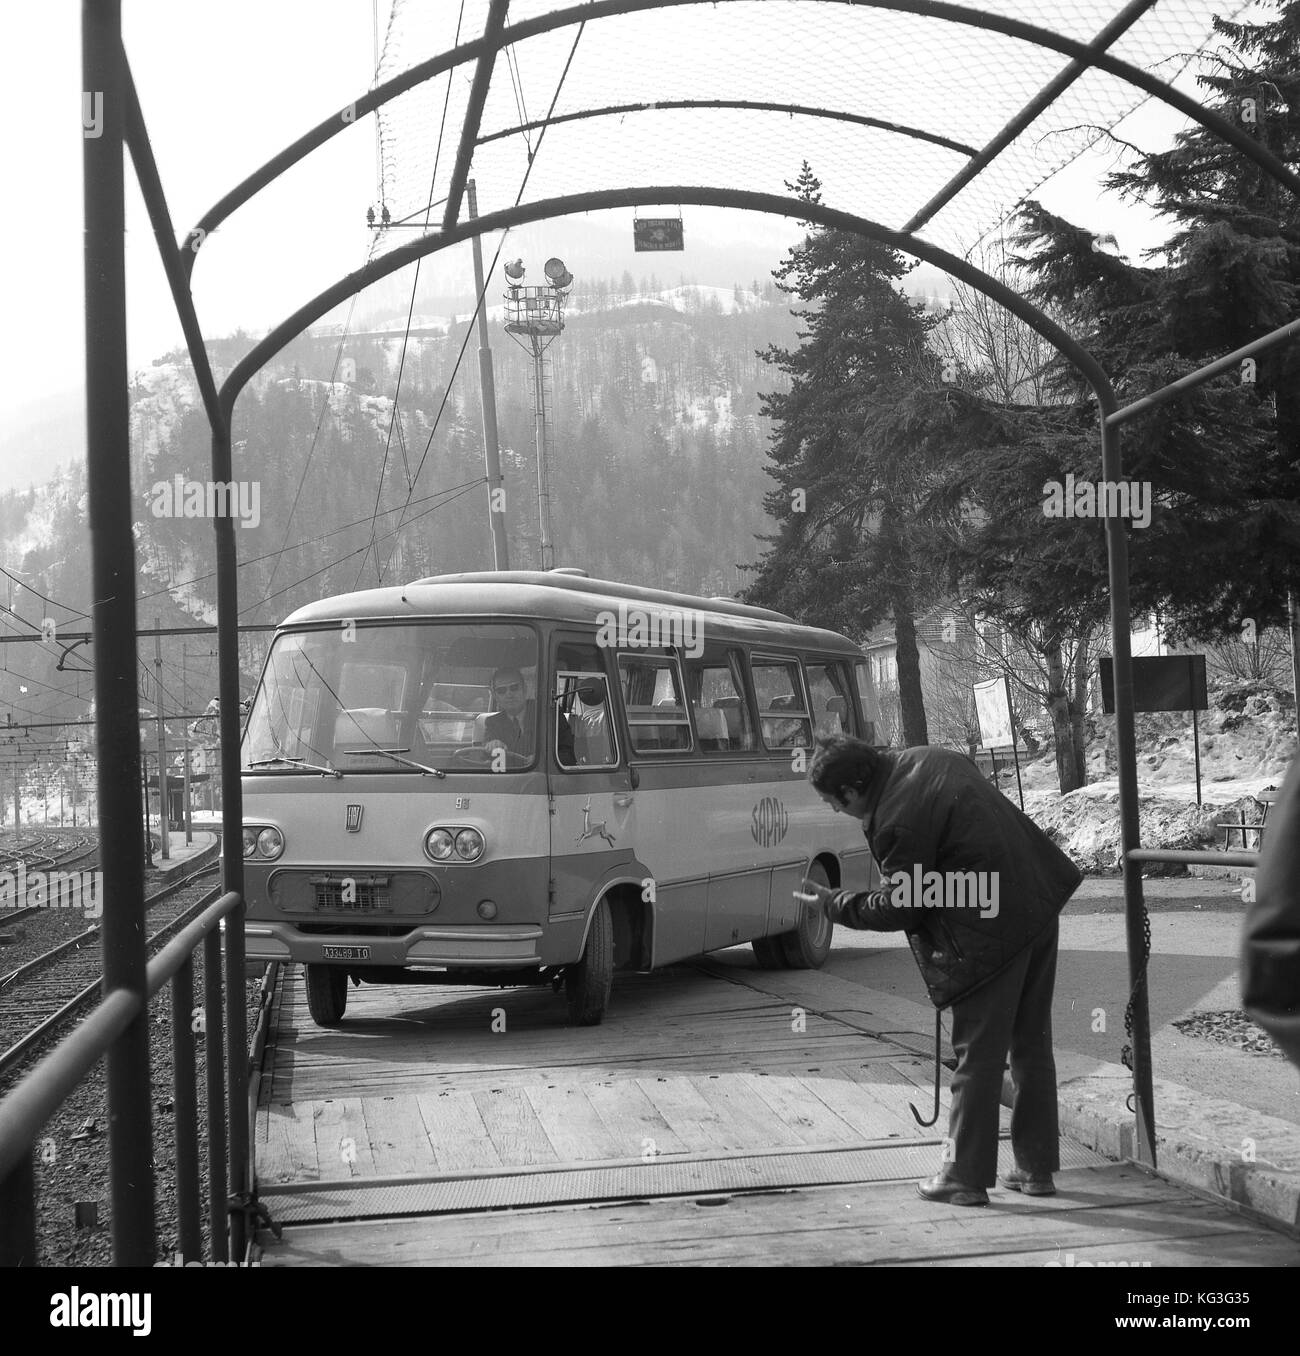 1950s, historical, mini-coach boarding or driving onto the flat deck of a car-carrier railway wagon to be transported, Trentino, Italy. This form of motorail travel was popular in Europe at this time. Stock Photo